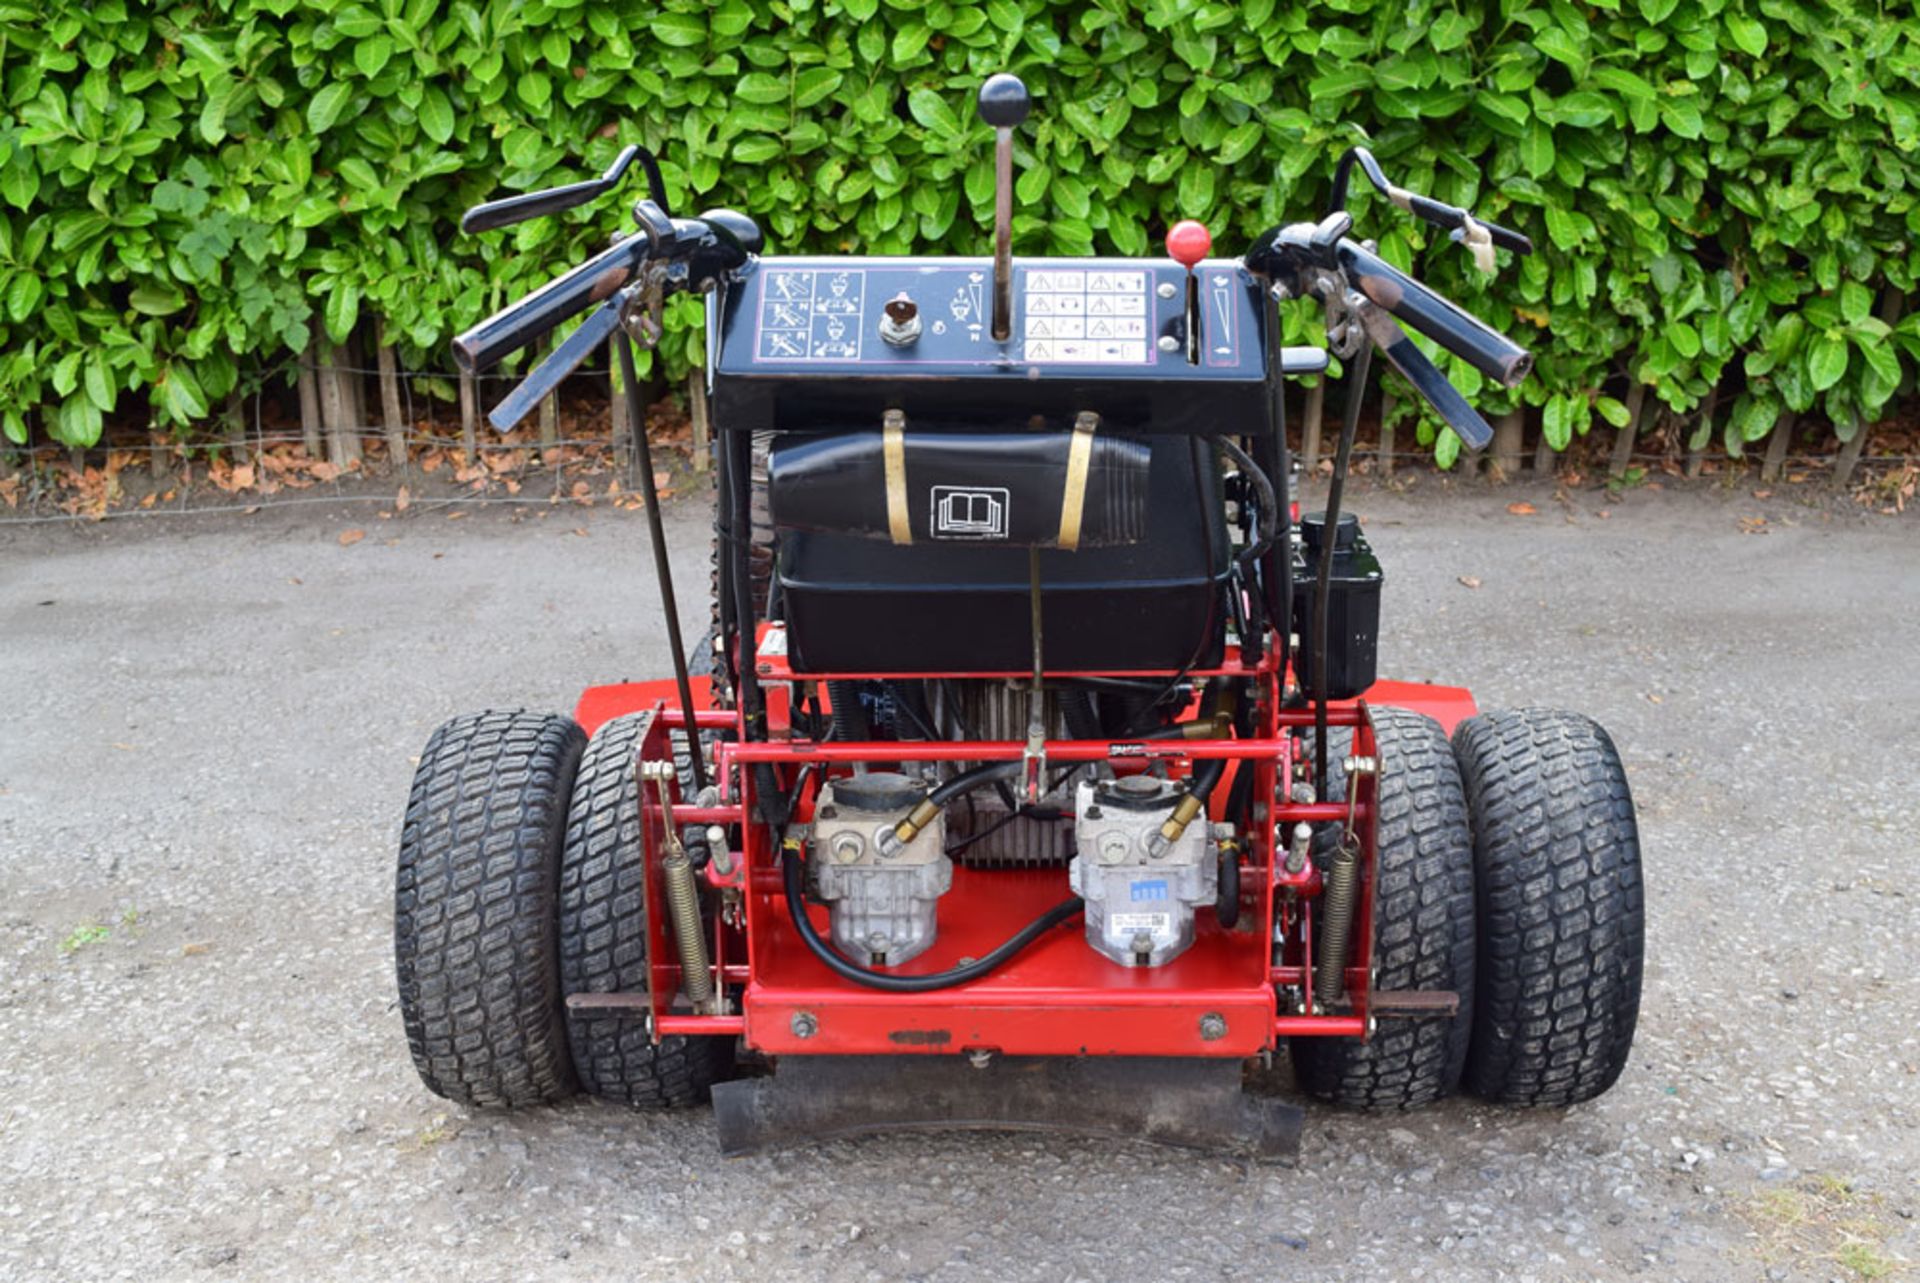 2009 Toro Commercial Pedestrian 48" Commercial Walk Behind Zero Turn Rotary Mower - Image 6 of 7